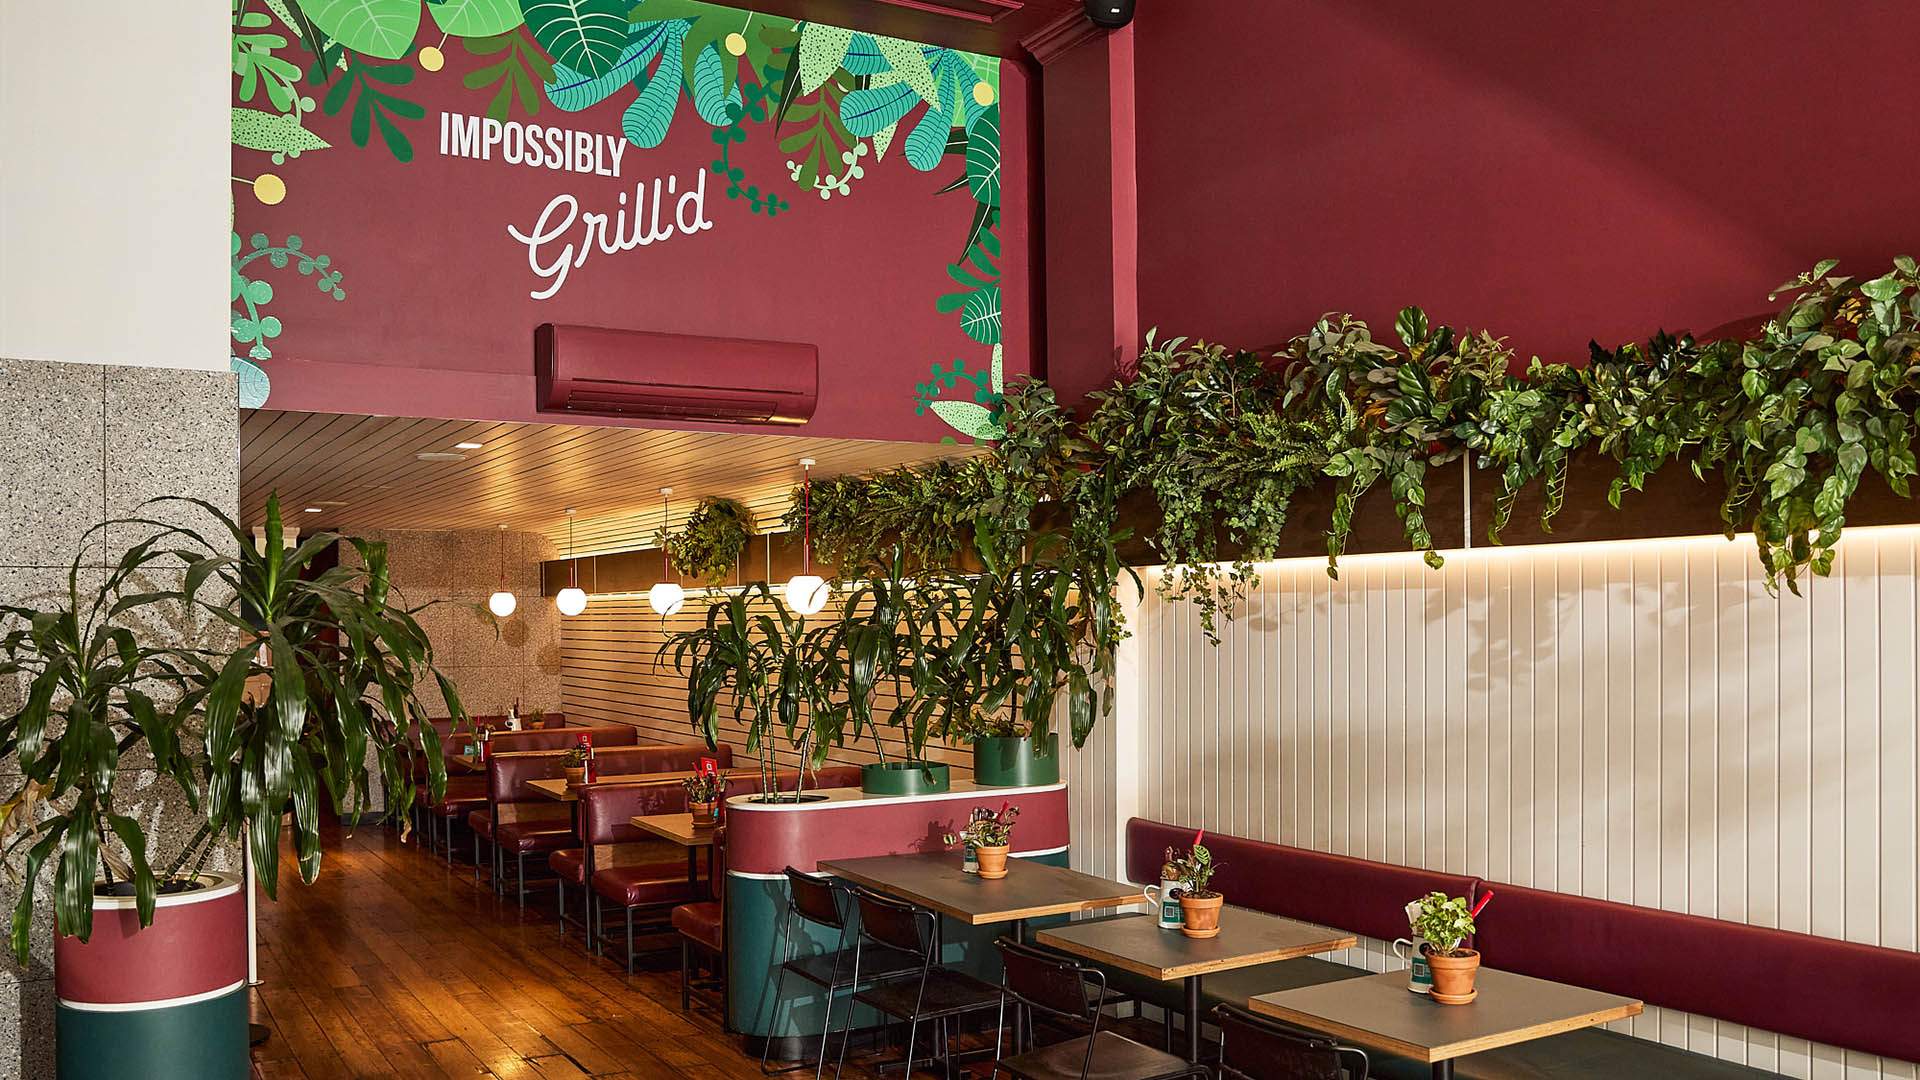 Grill'd Has Converted Two of Its Burger Joints to Completely Plant-Based Menus